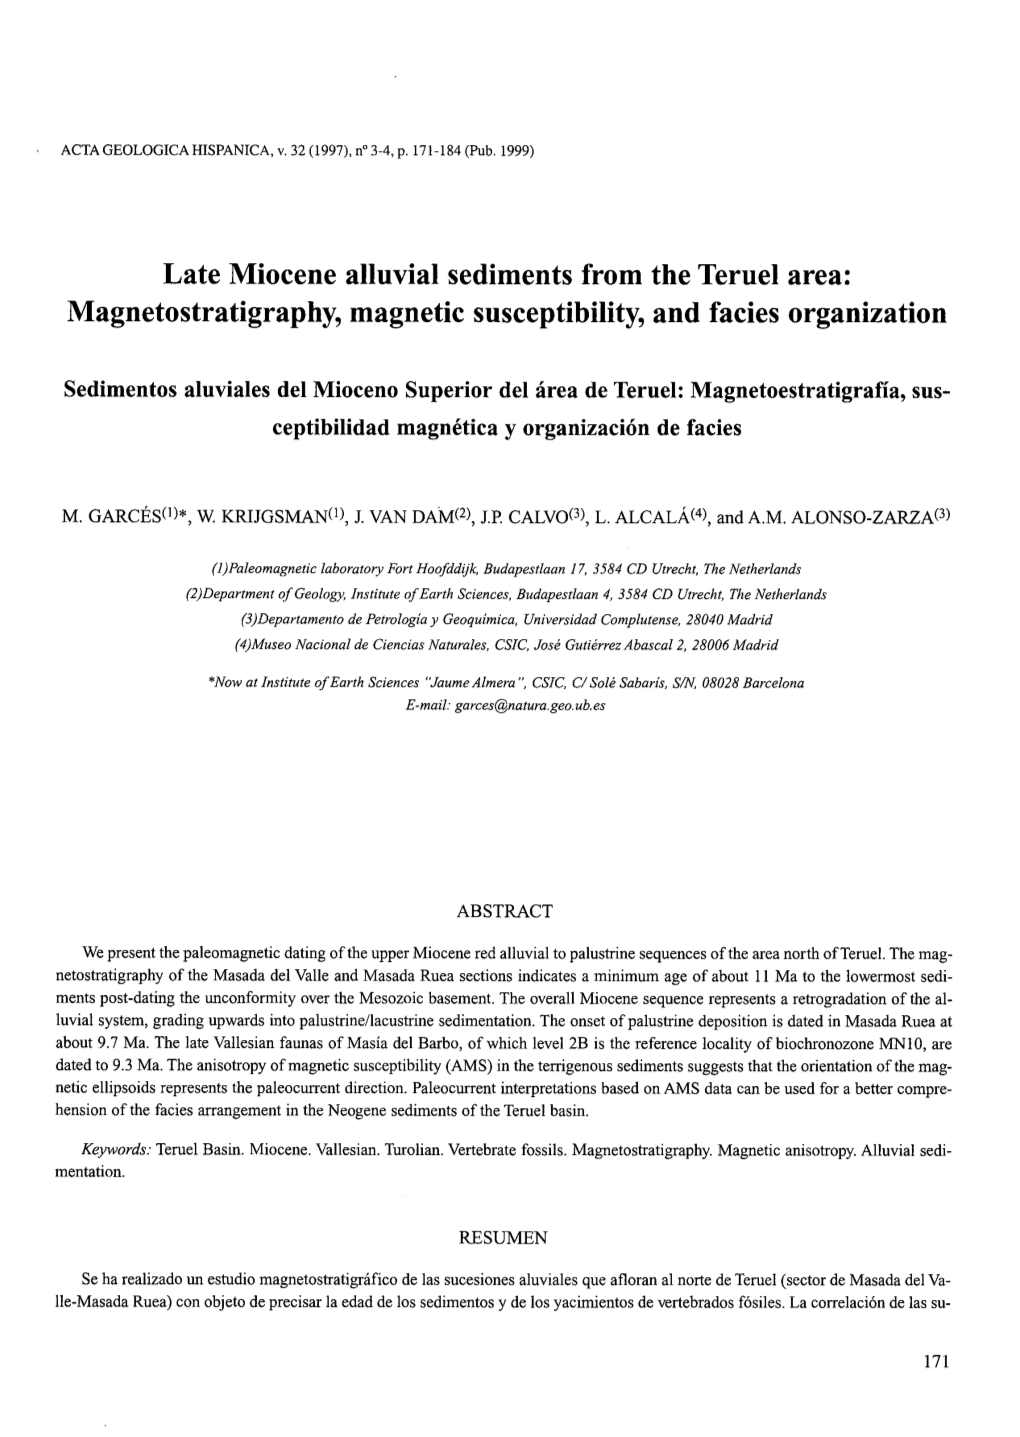 Late Miocene Alluvial Sediments from the Teruel Area: Magnetostratigraphy, Magnetic Susceptibility, and Facies Organization